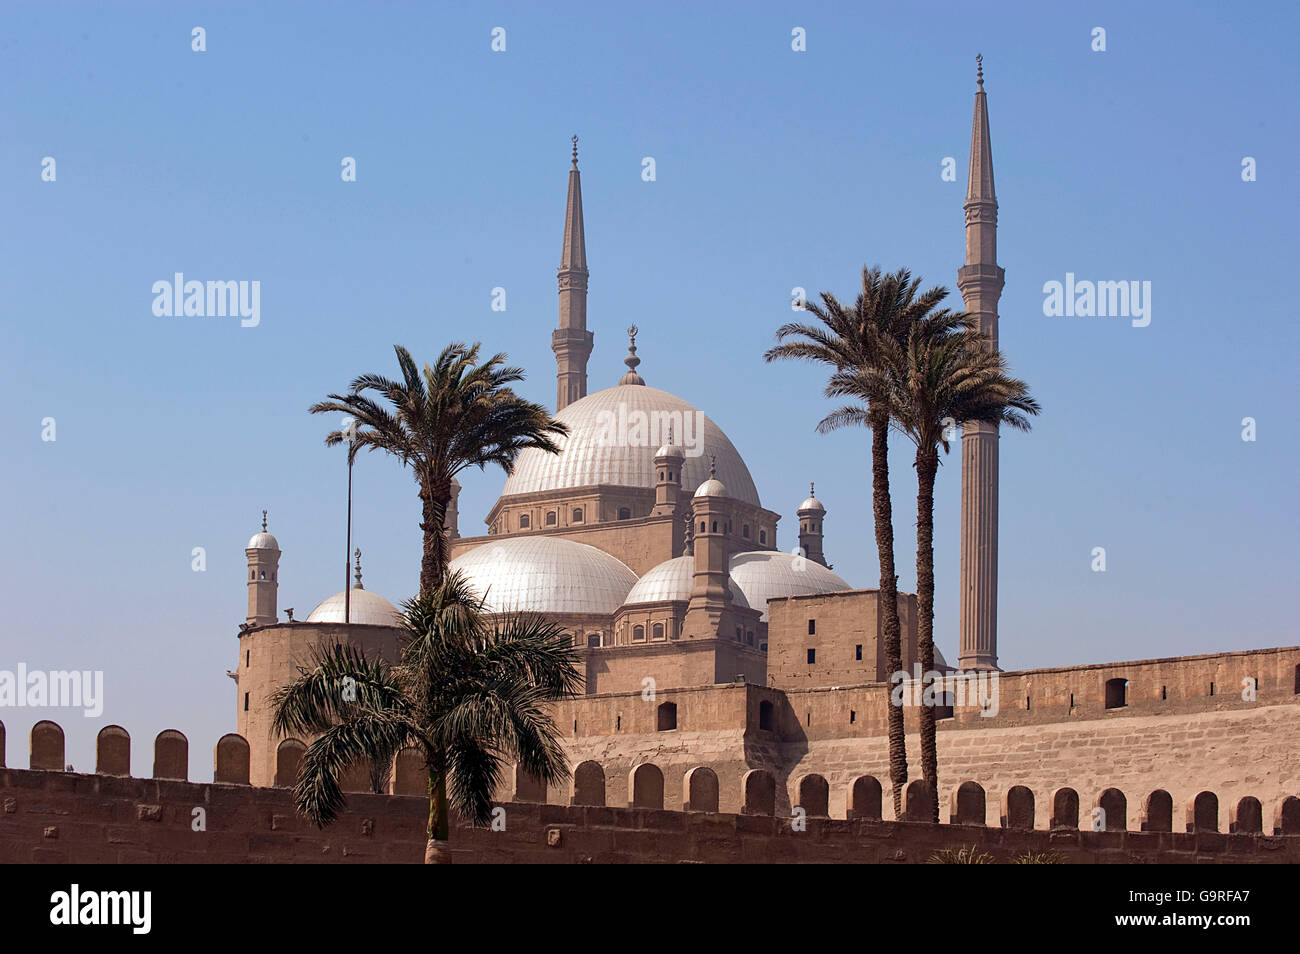 The great Mosque of Muhammad Ali Pasha, twin minarets, Ottoman style, Persian style, domed building, Cairo, Egypt / Alabaster Mosque Stock Photo